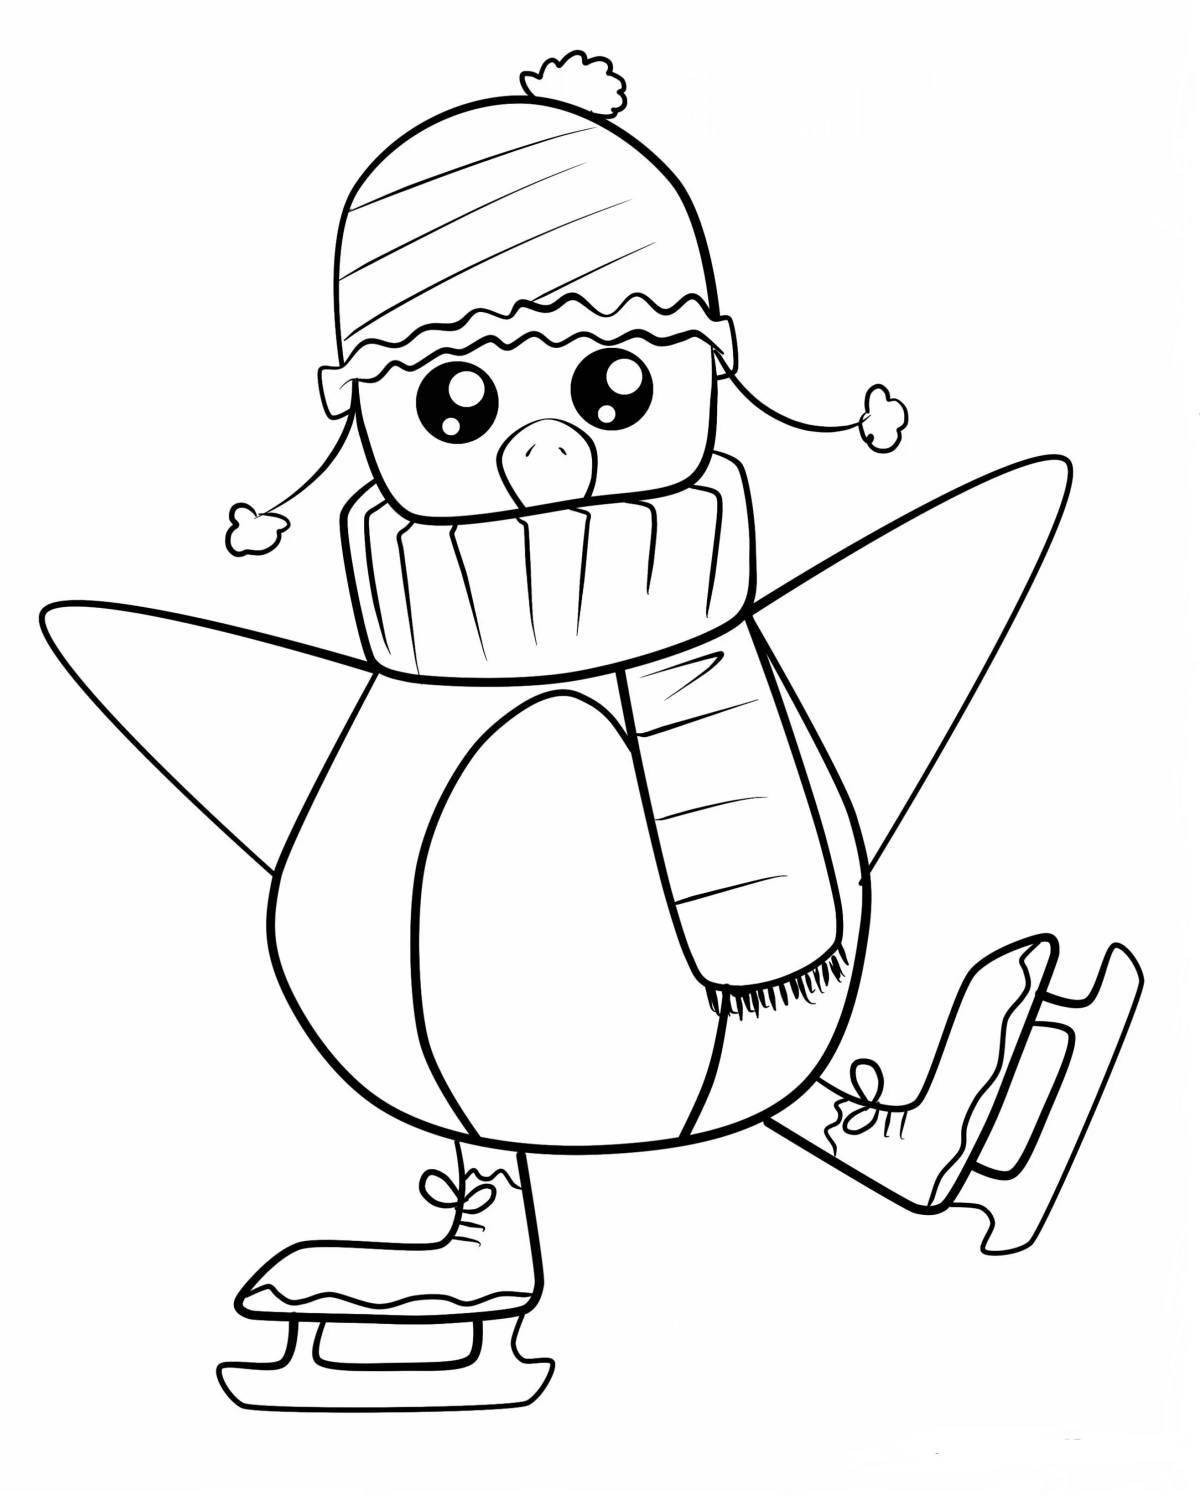 Coloring page funny penguin